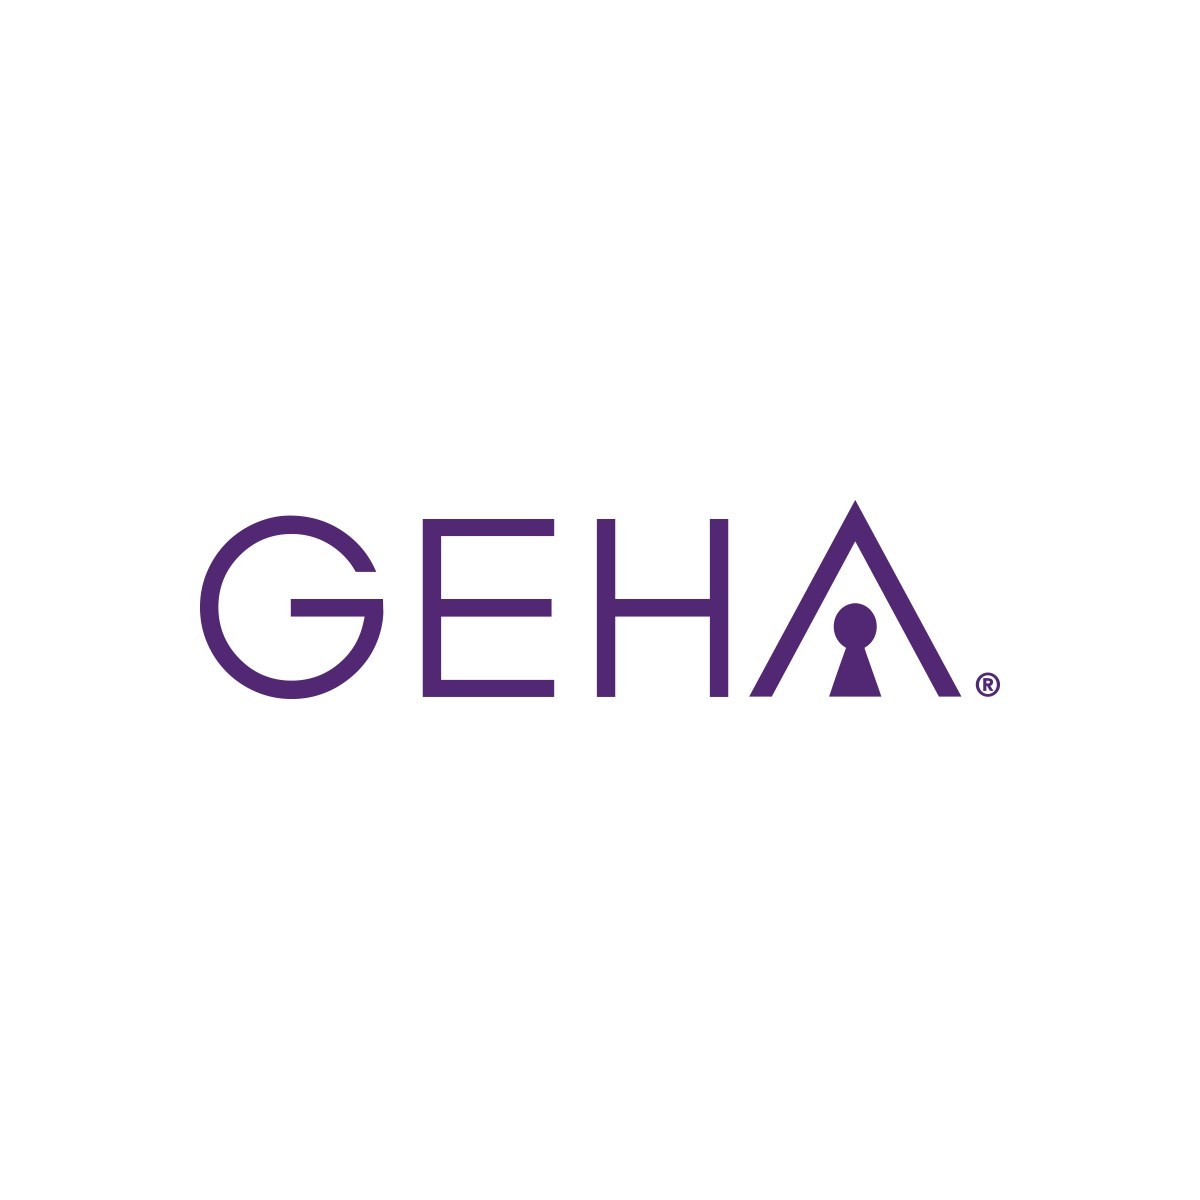 GEHA Selected as Carrier to Offer New Nationwide Benefit Plan to FEHB